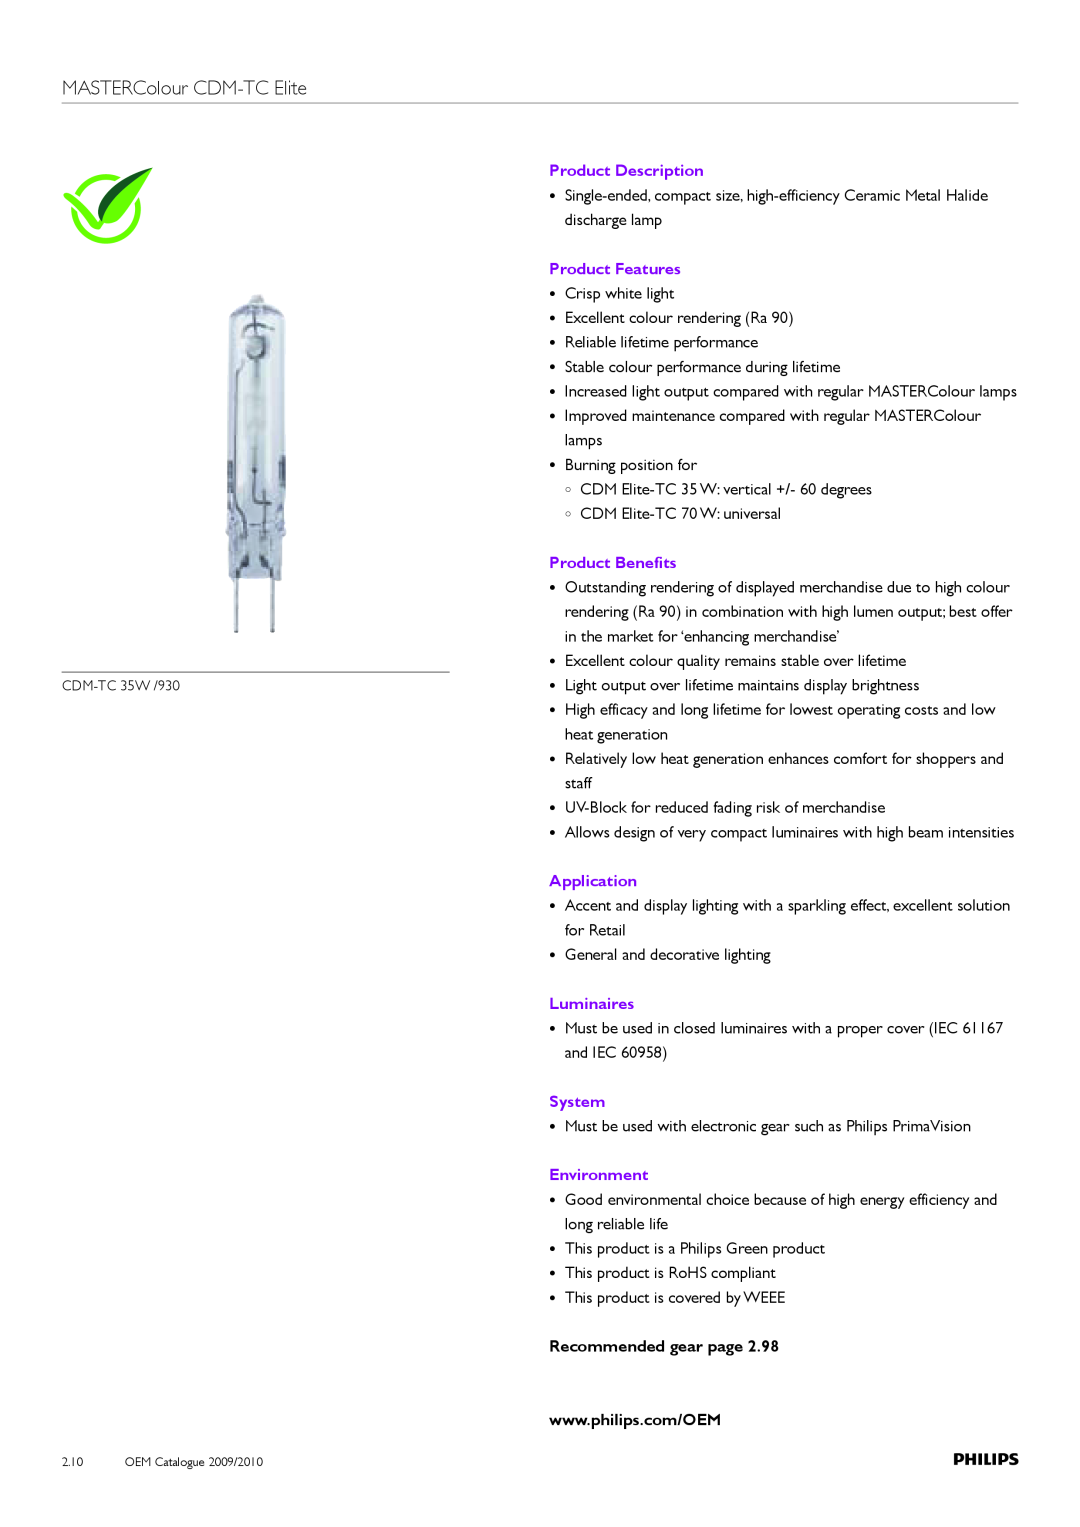 Philips Compact HID Lamp and Gear manual MASTERColour CDM-TCElite, Product Description, Product Features, Product Benefits 